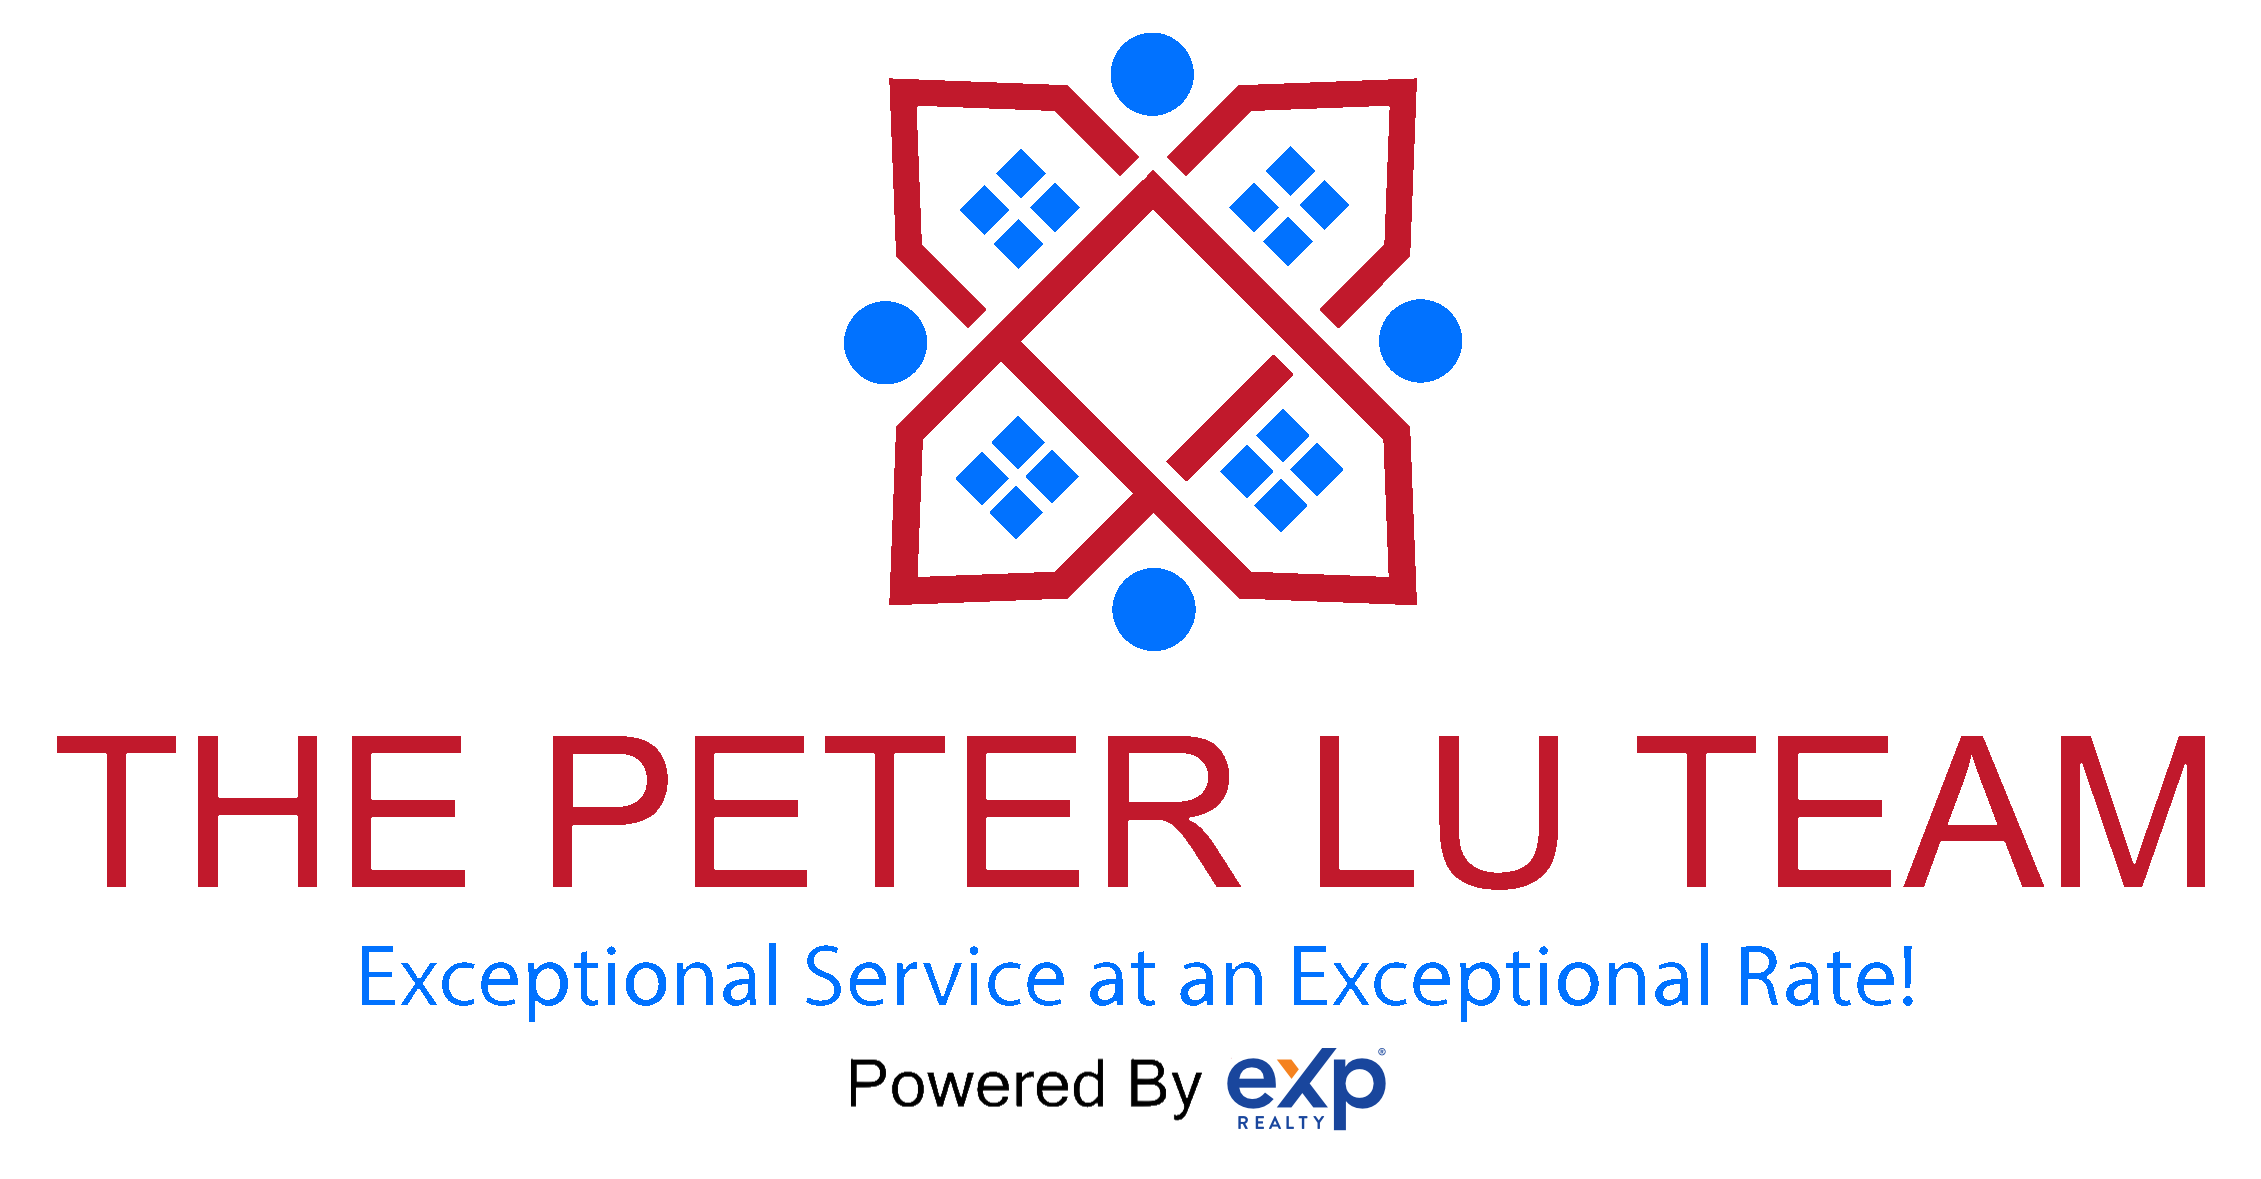 The Peter Lu Team powered by eXp Realty reviews | 11142 Olive Blvd. - Saint Louis MO